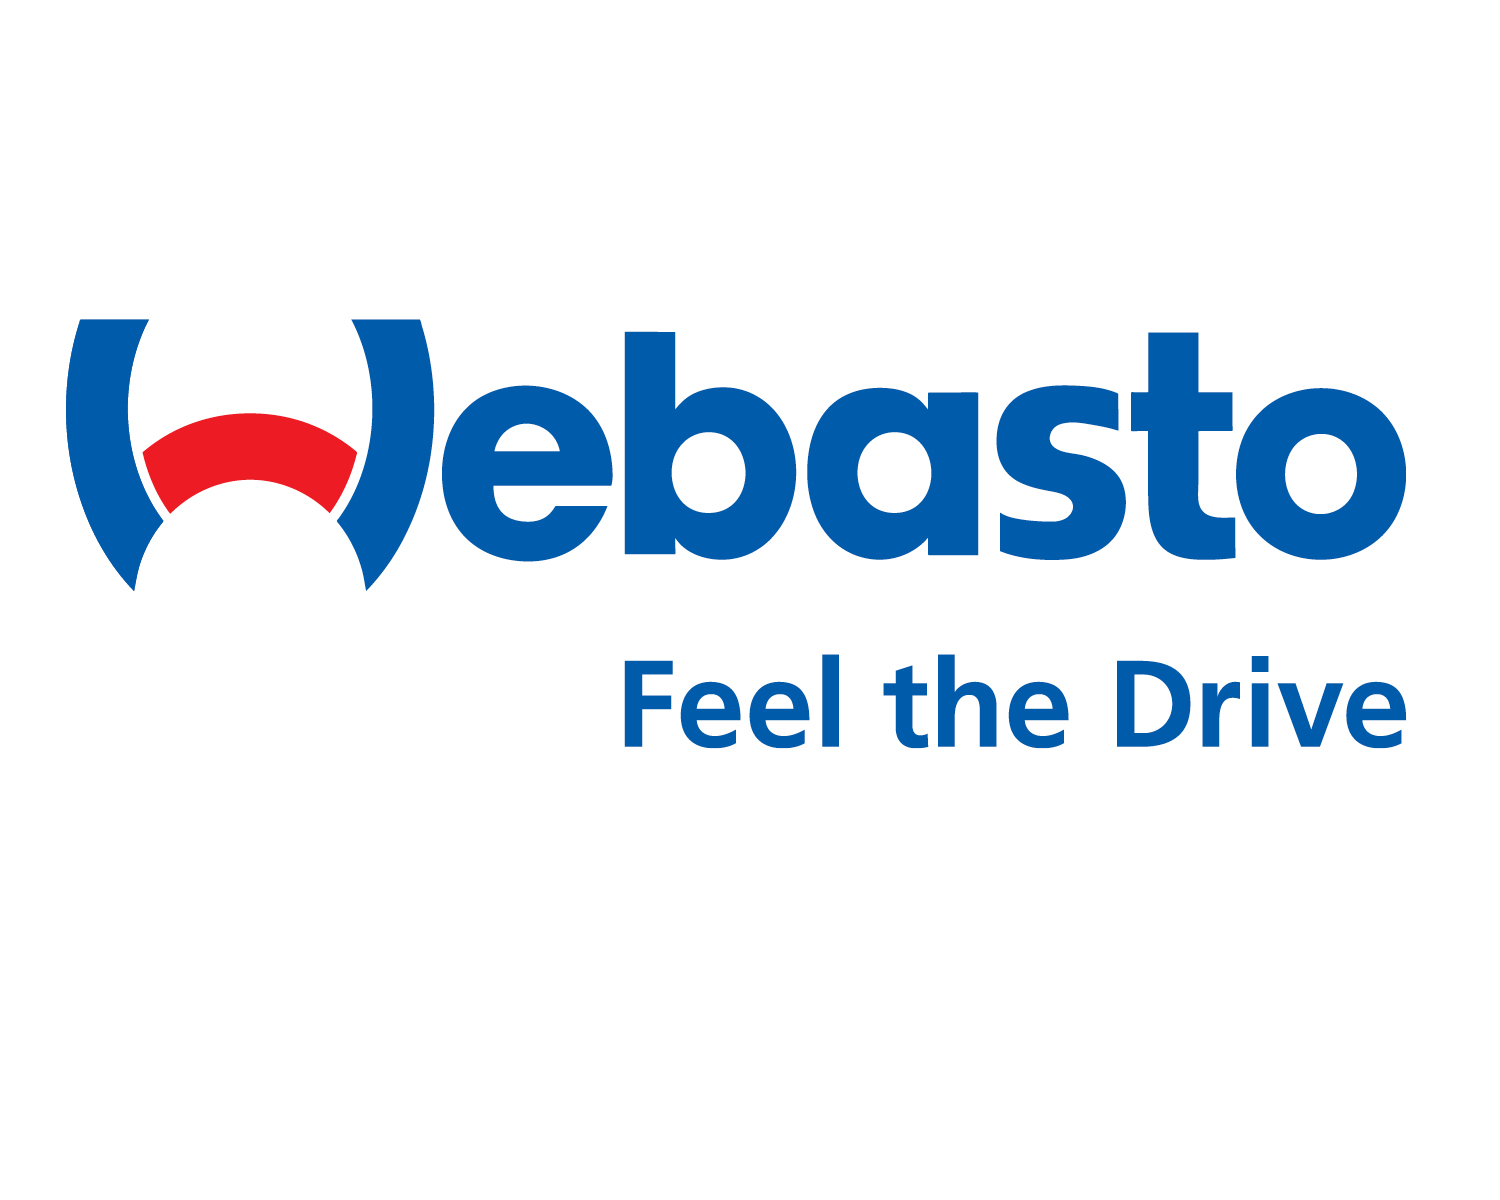 Webasto North America is a top-100 global tier-one automotive, commercial vehicle and aftermarket equipment manufacturer.